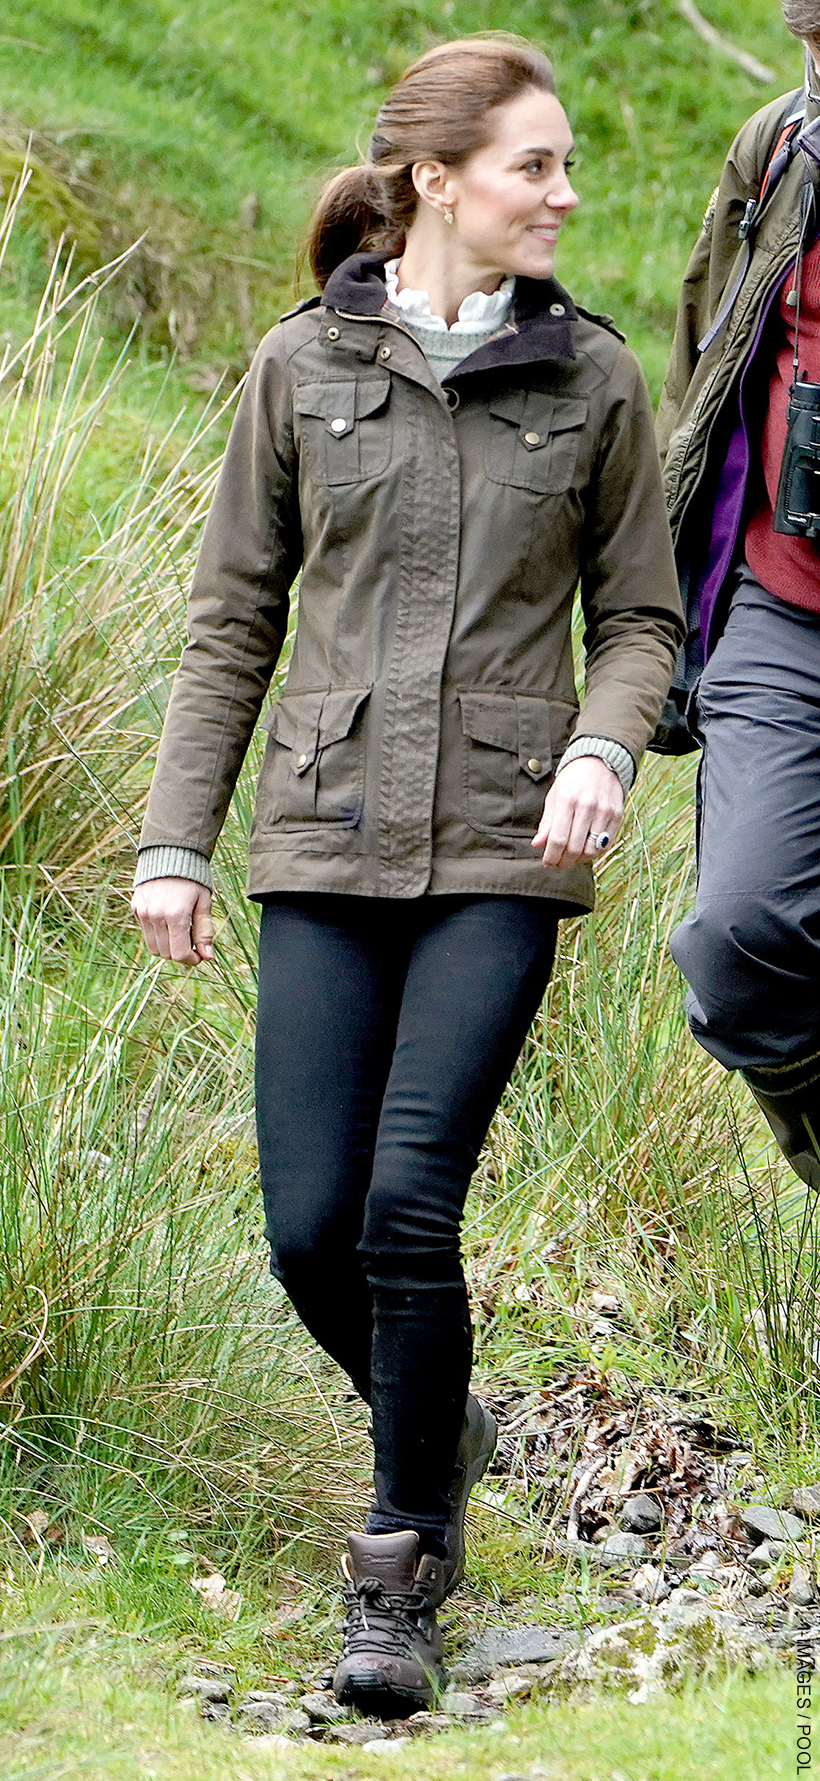 Kate Middleton wearing her Barbour jacket during a visit to Cumbria